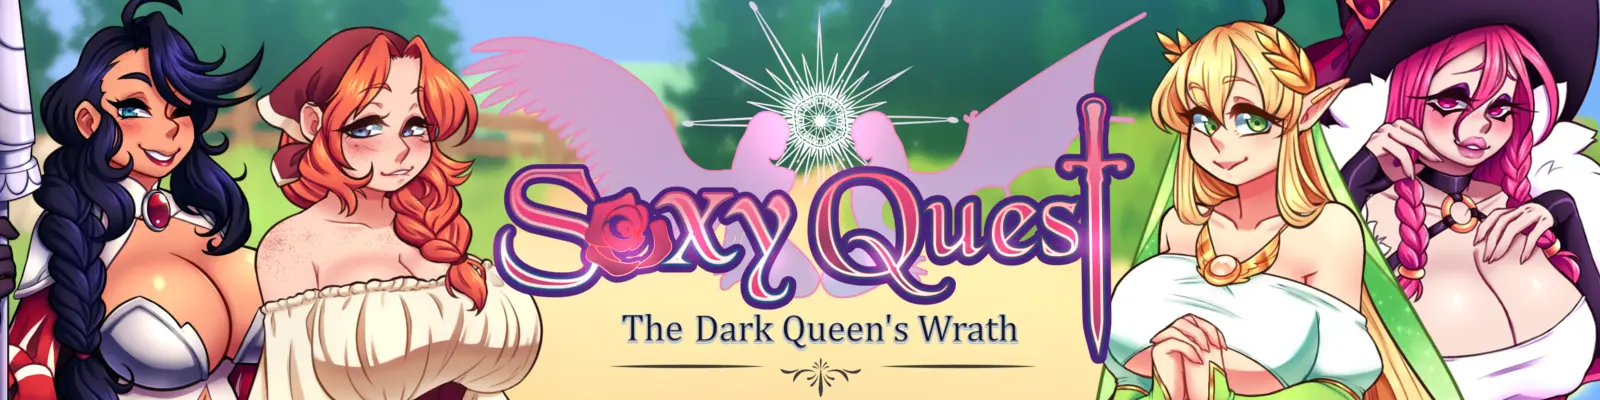 Sexy Quest: The Dark Queen's Wrath [v0.2a] main image